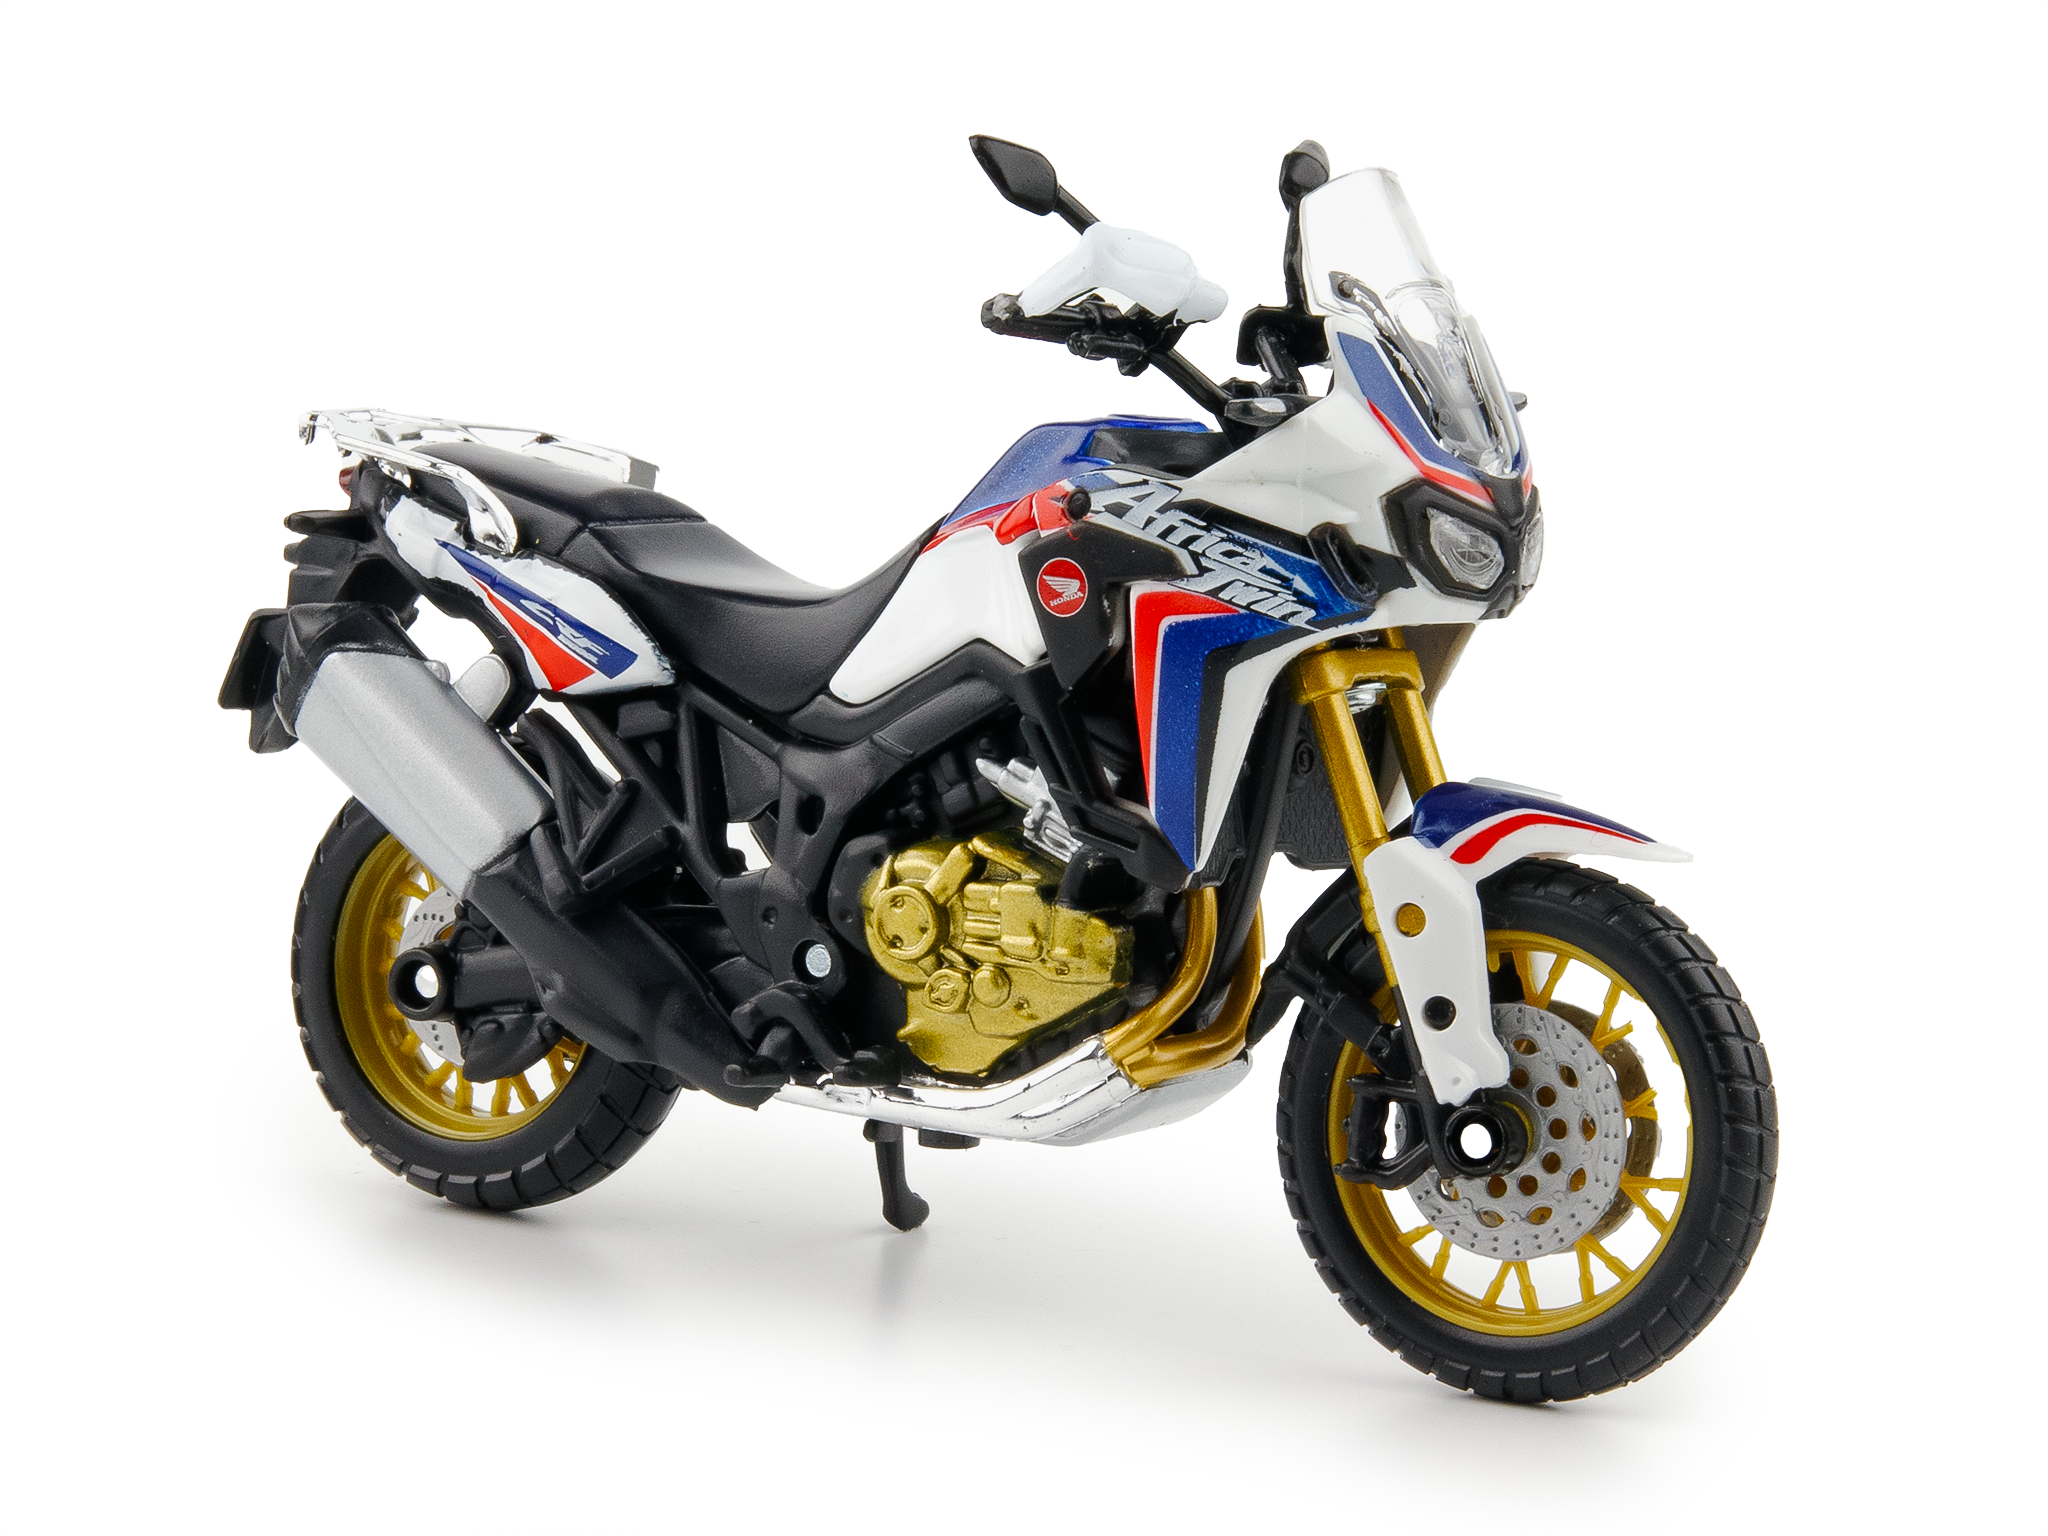 Honda CRF1000L Africa Twin Adventure Sports 2019 - 1:18 Scale Diecast Model Motorcycle